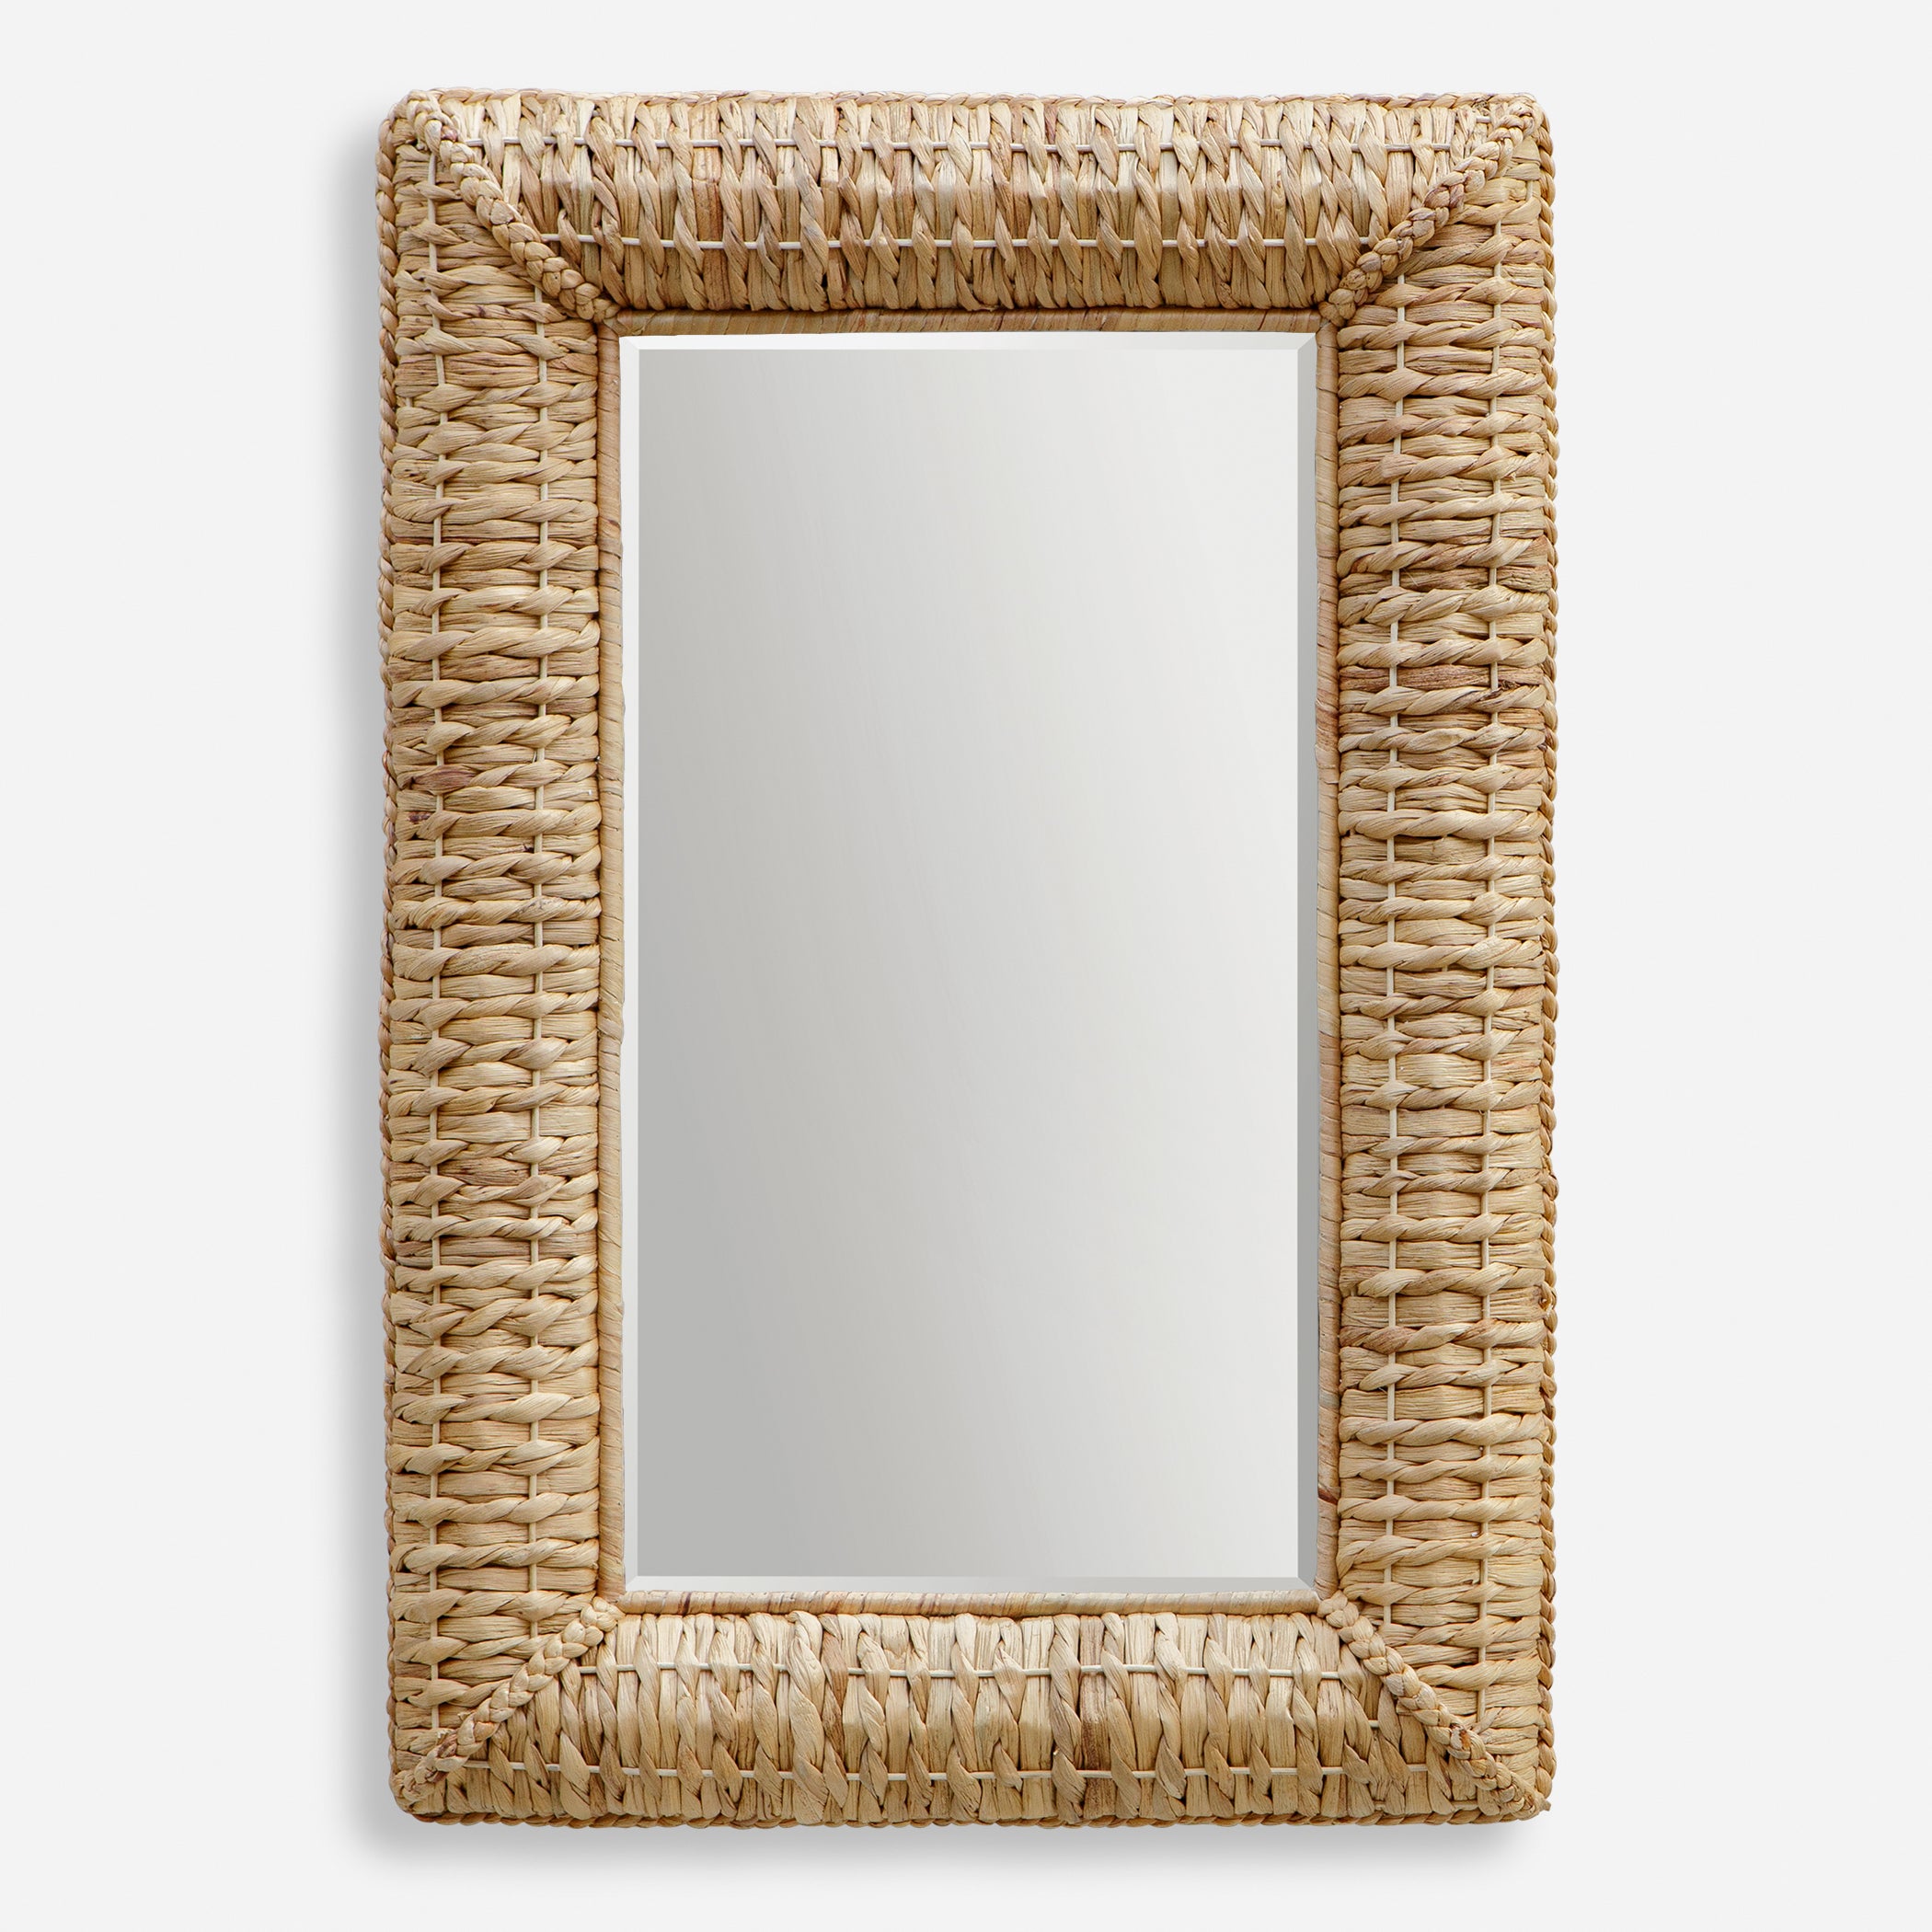 Uttermost Twisted Seagrass Seagrass Rectangle Mirror Seagrass Rectangle Mirror Uttermost   